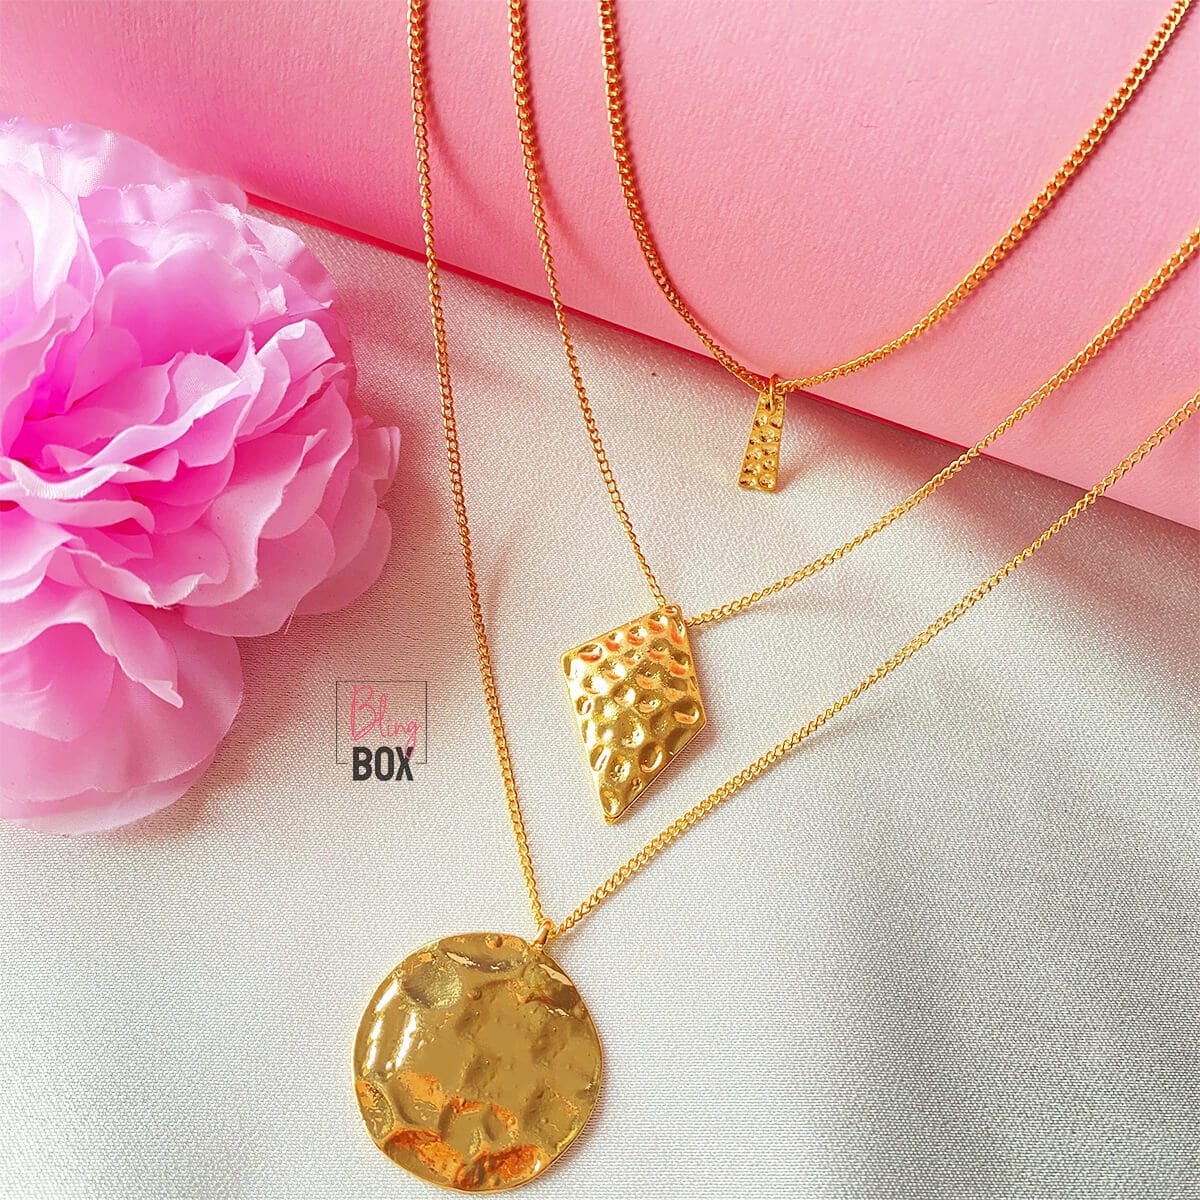 Gold Layered Chains + Pendant Necklace | Uncommon James